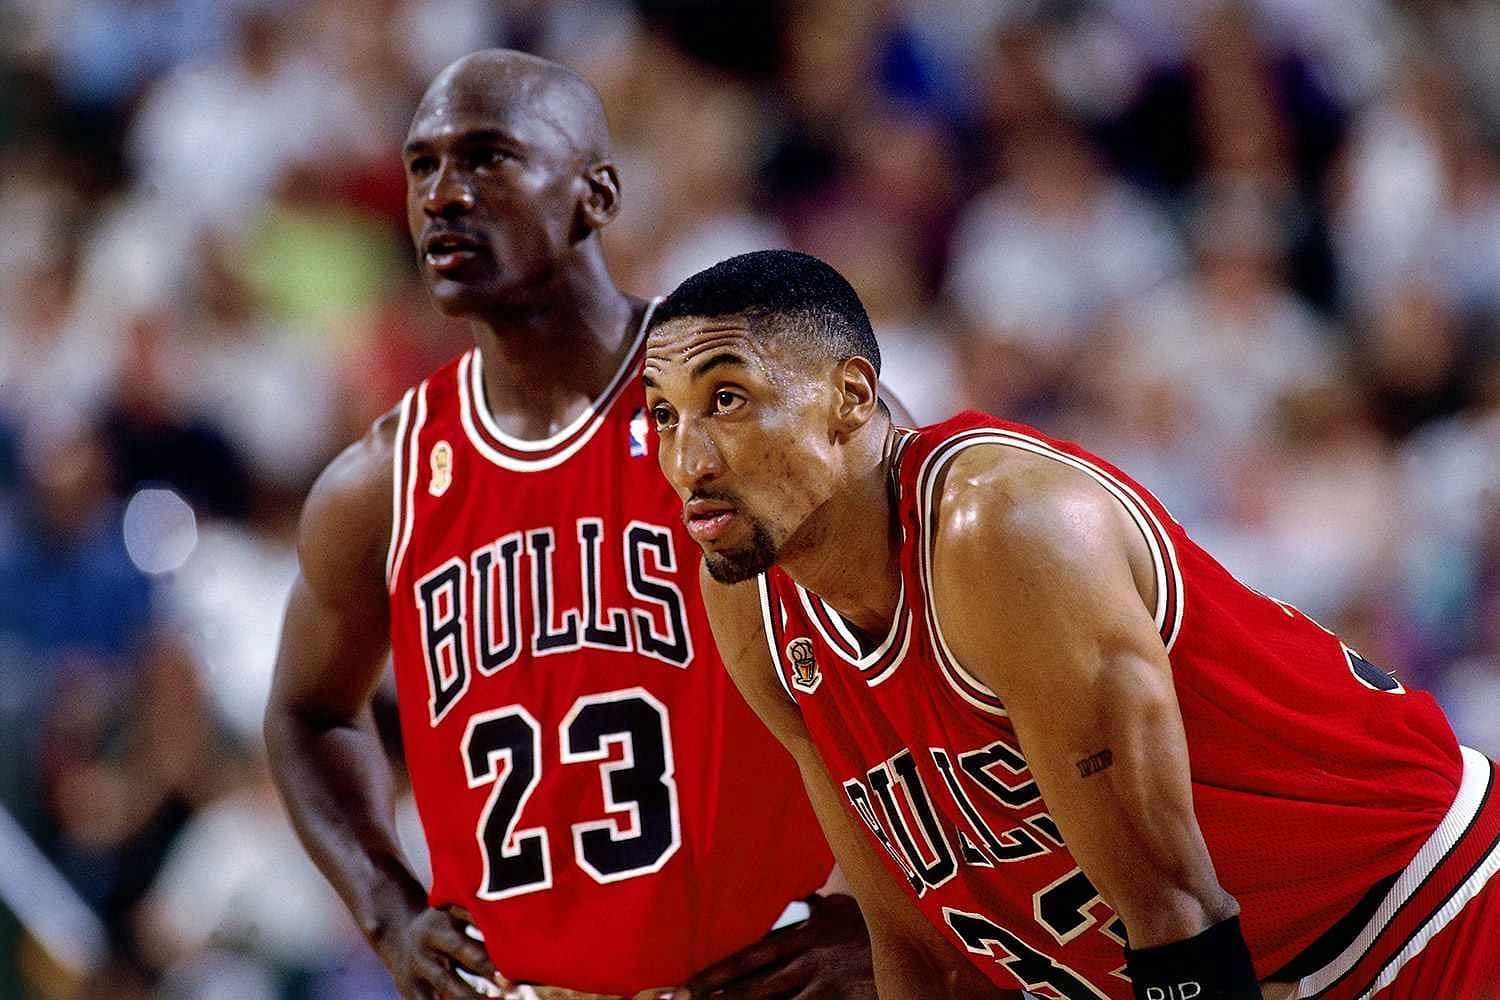 Michael Jordan (left) and Scottie Pippen with the Chicago Bulls